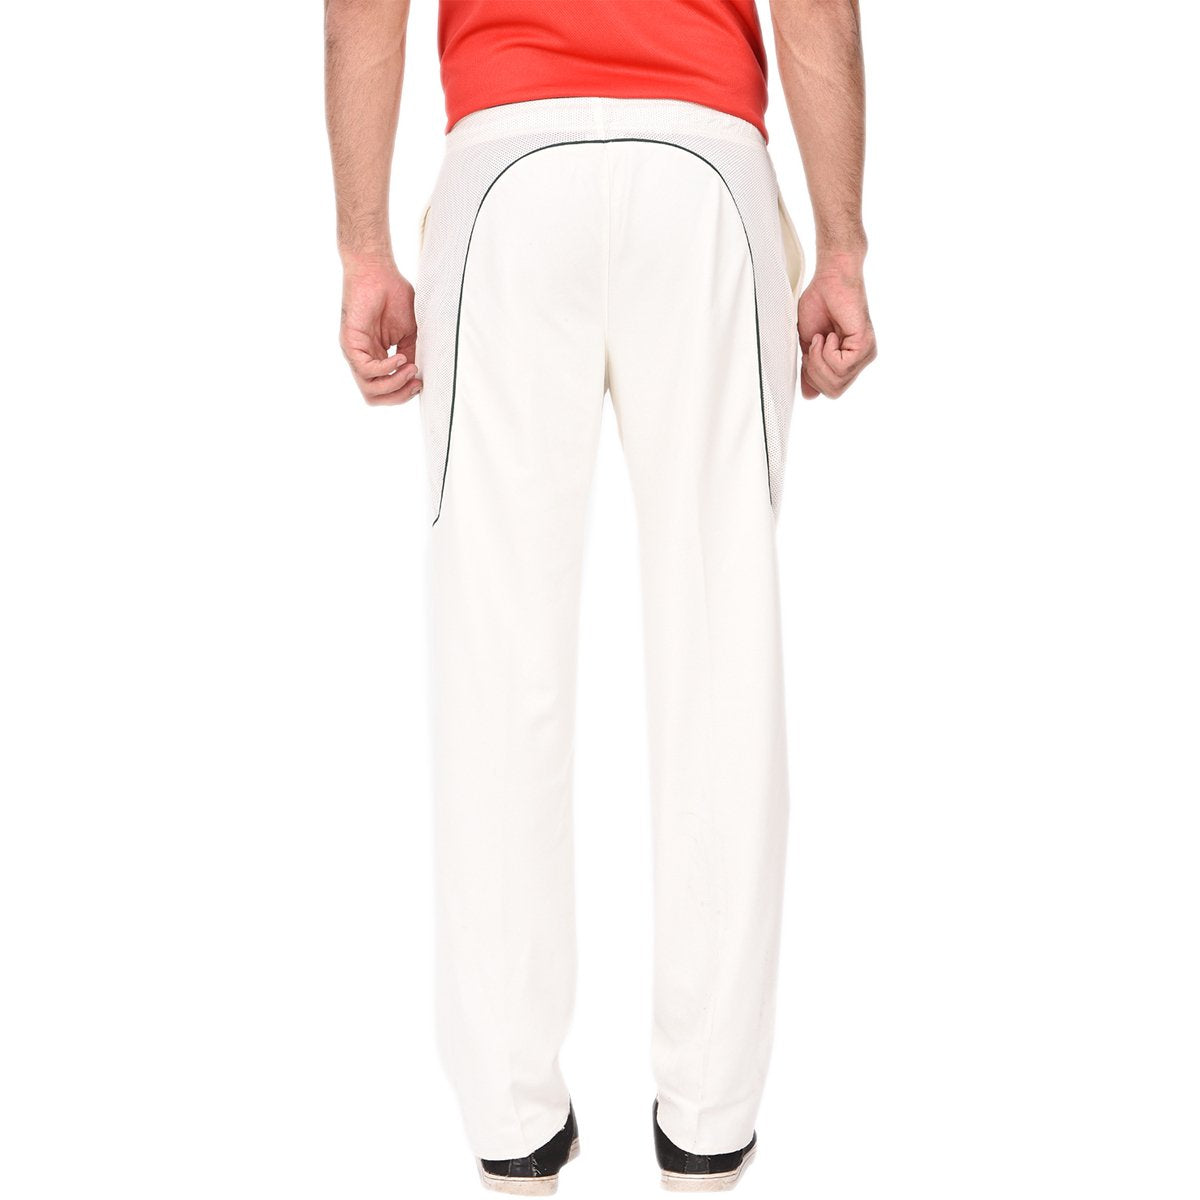 Cricket Pants  Cricket Track Pants Latest Price Manufacturers  Suppliers